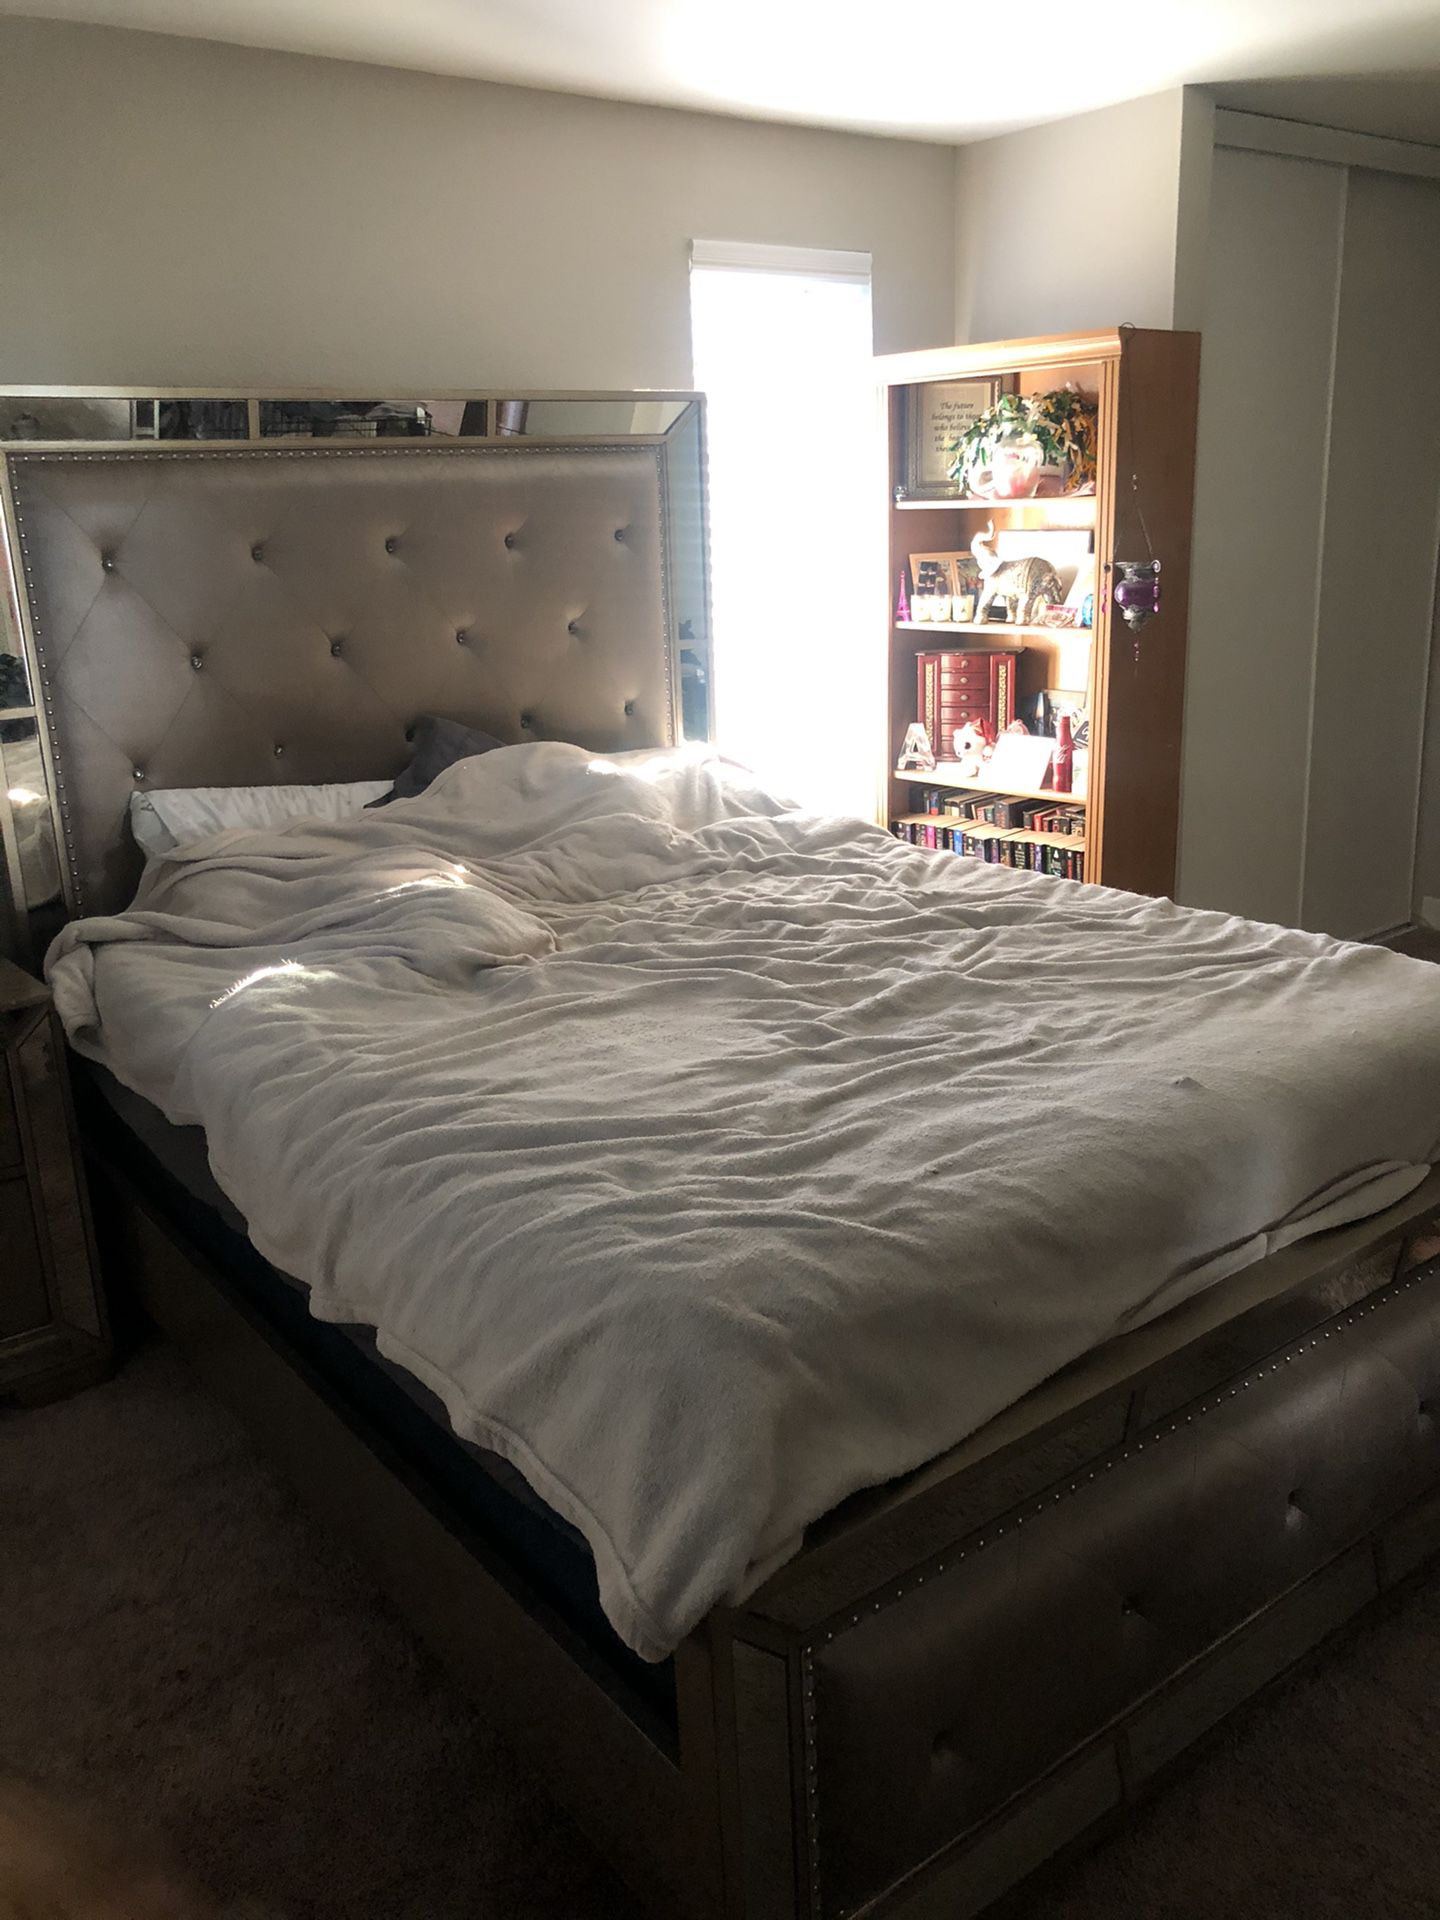 Queen Size Bed Frame W/ matching dresser and night stand